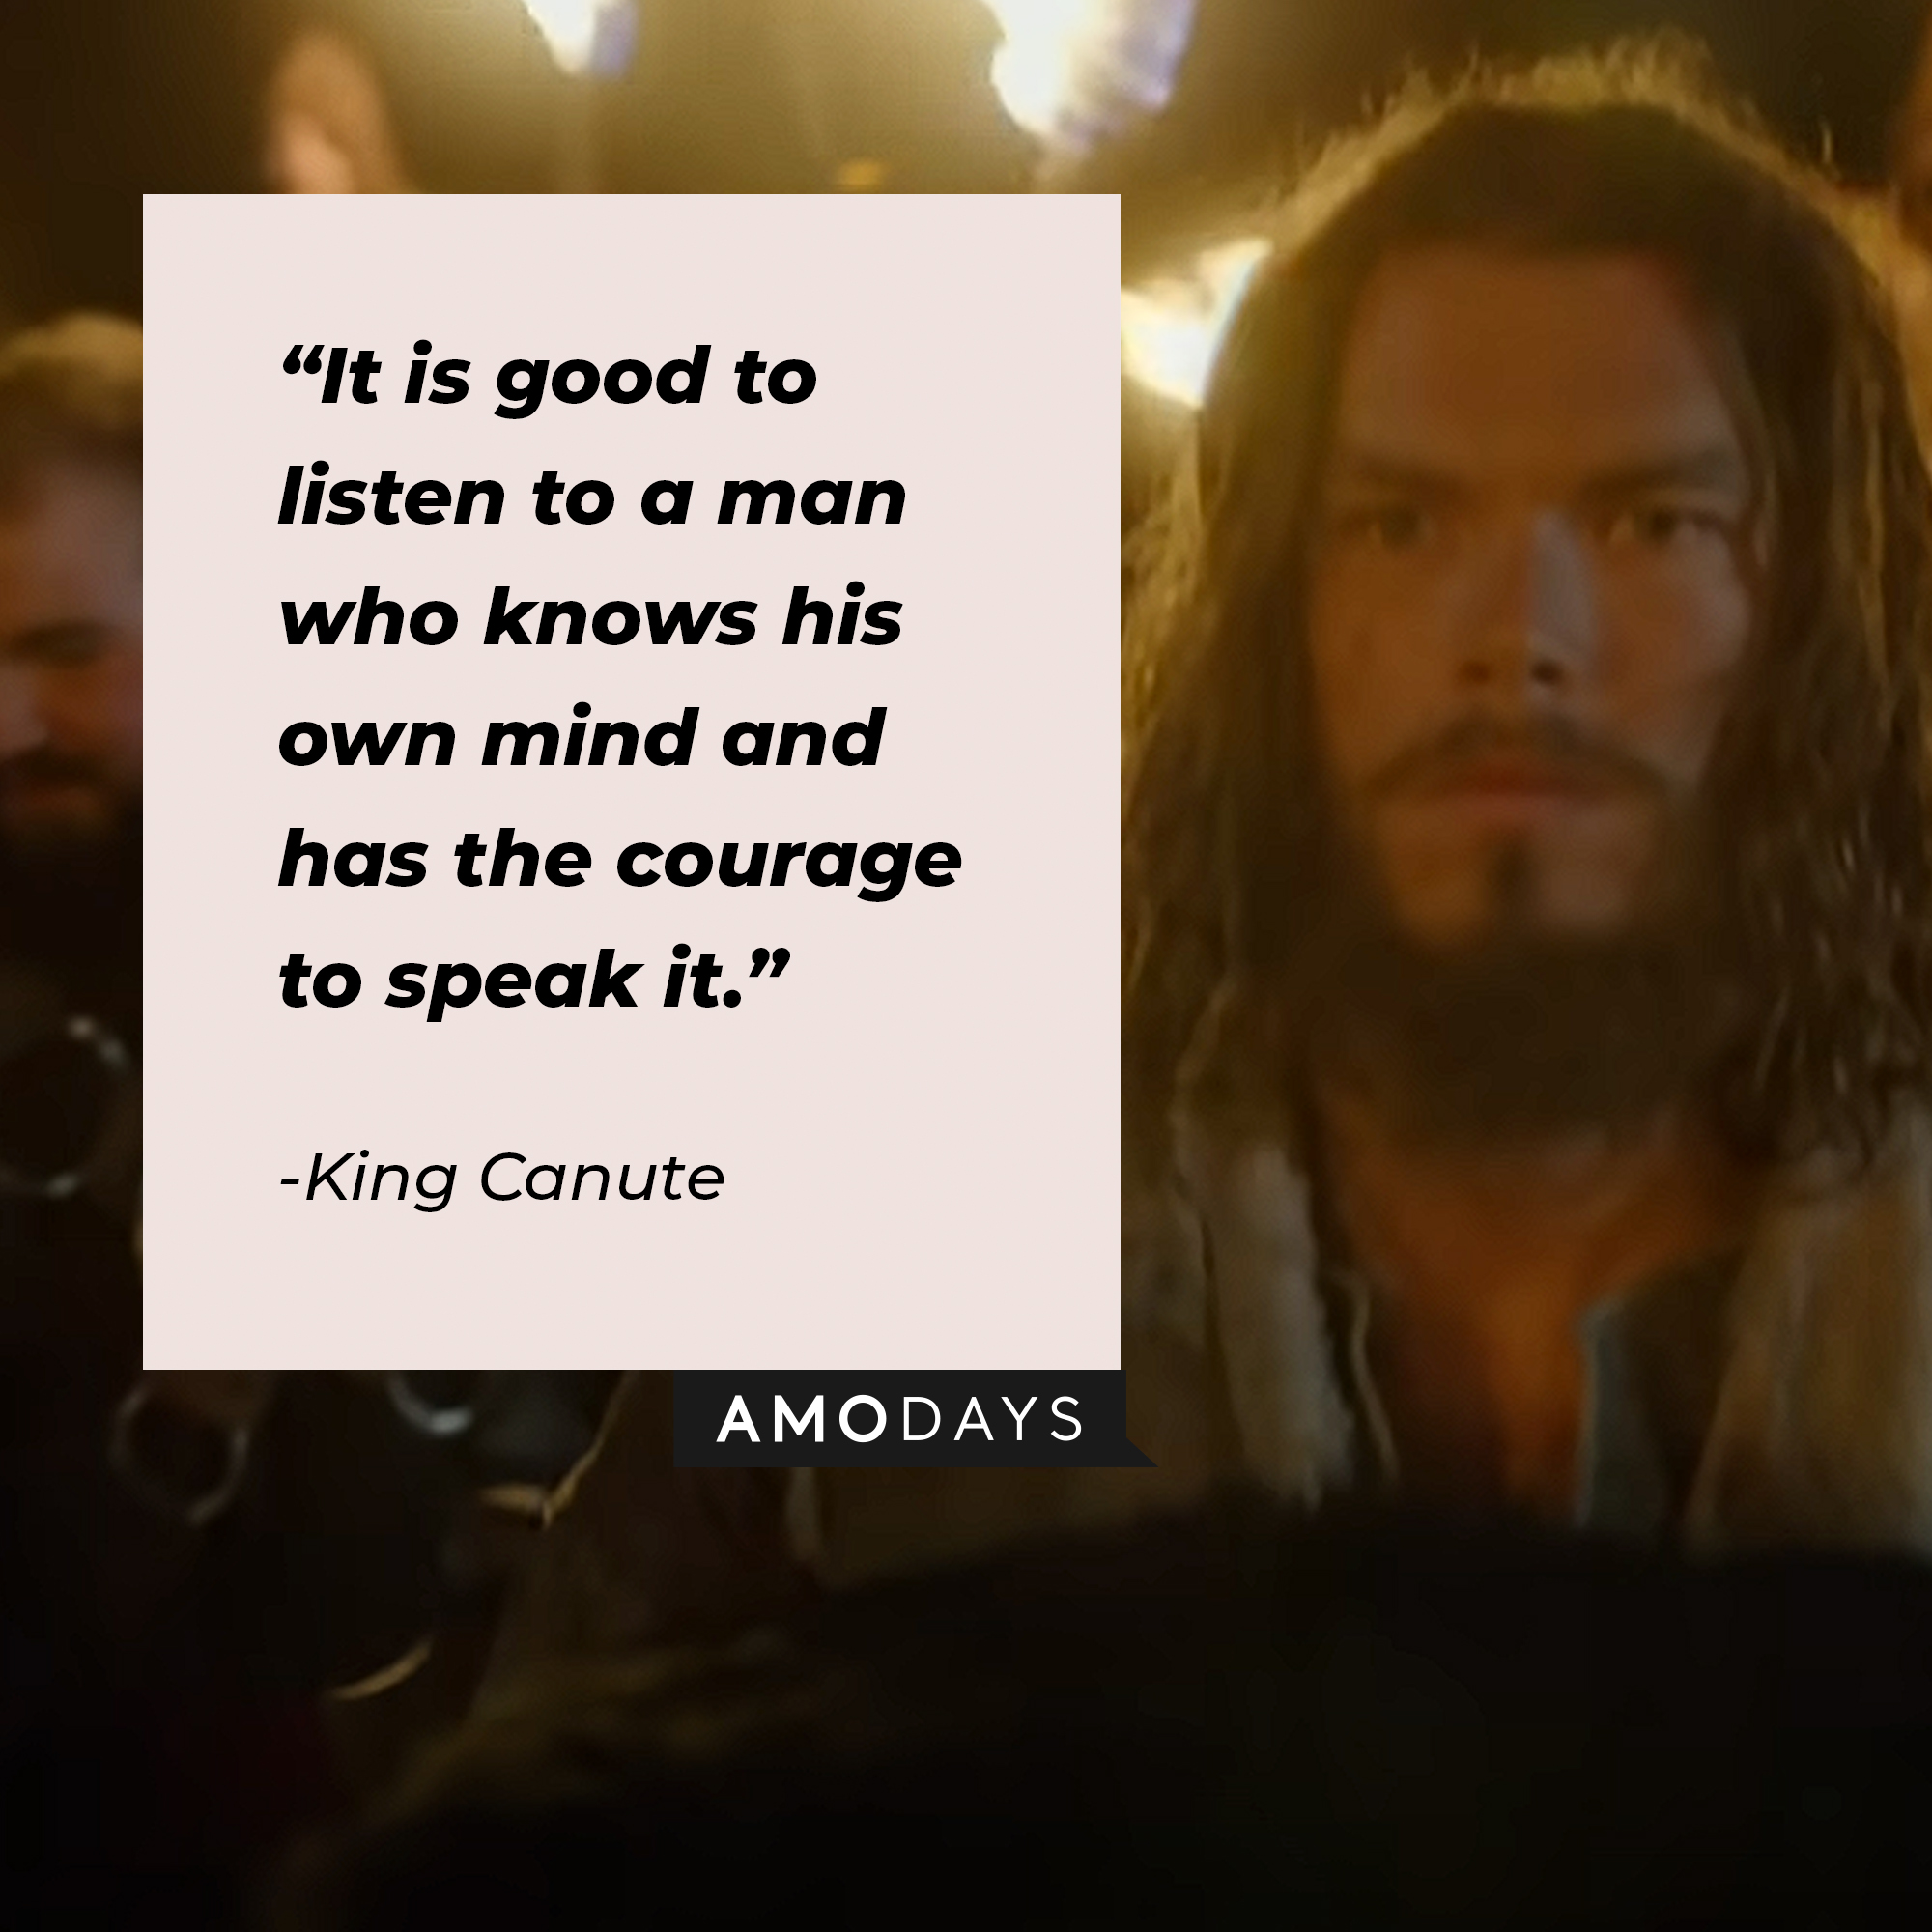 King Canute's quote: "It is good to listen to a man who knows his own mind and has the courage to speak it." | Image: youtube.com/Netflix